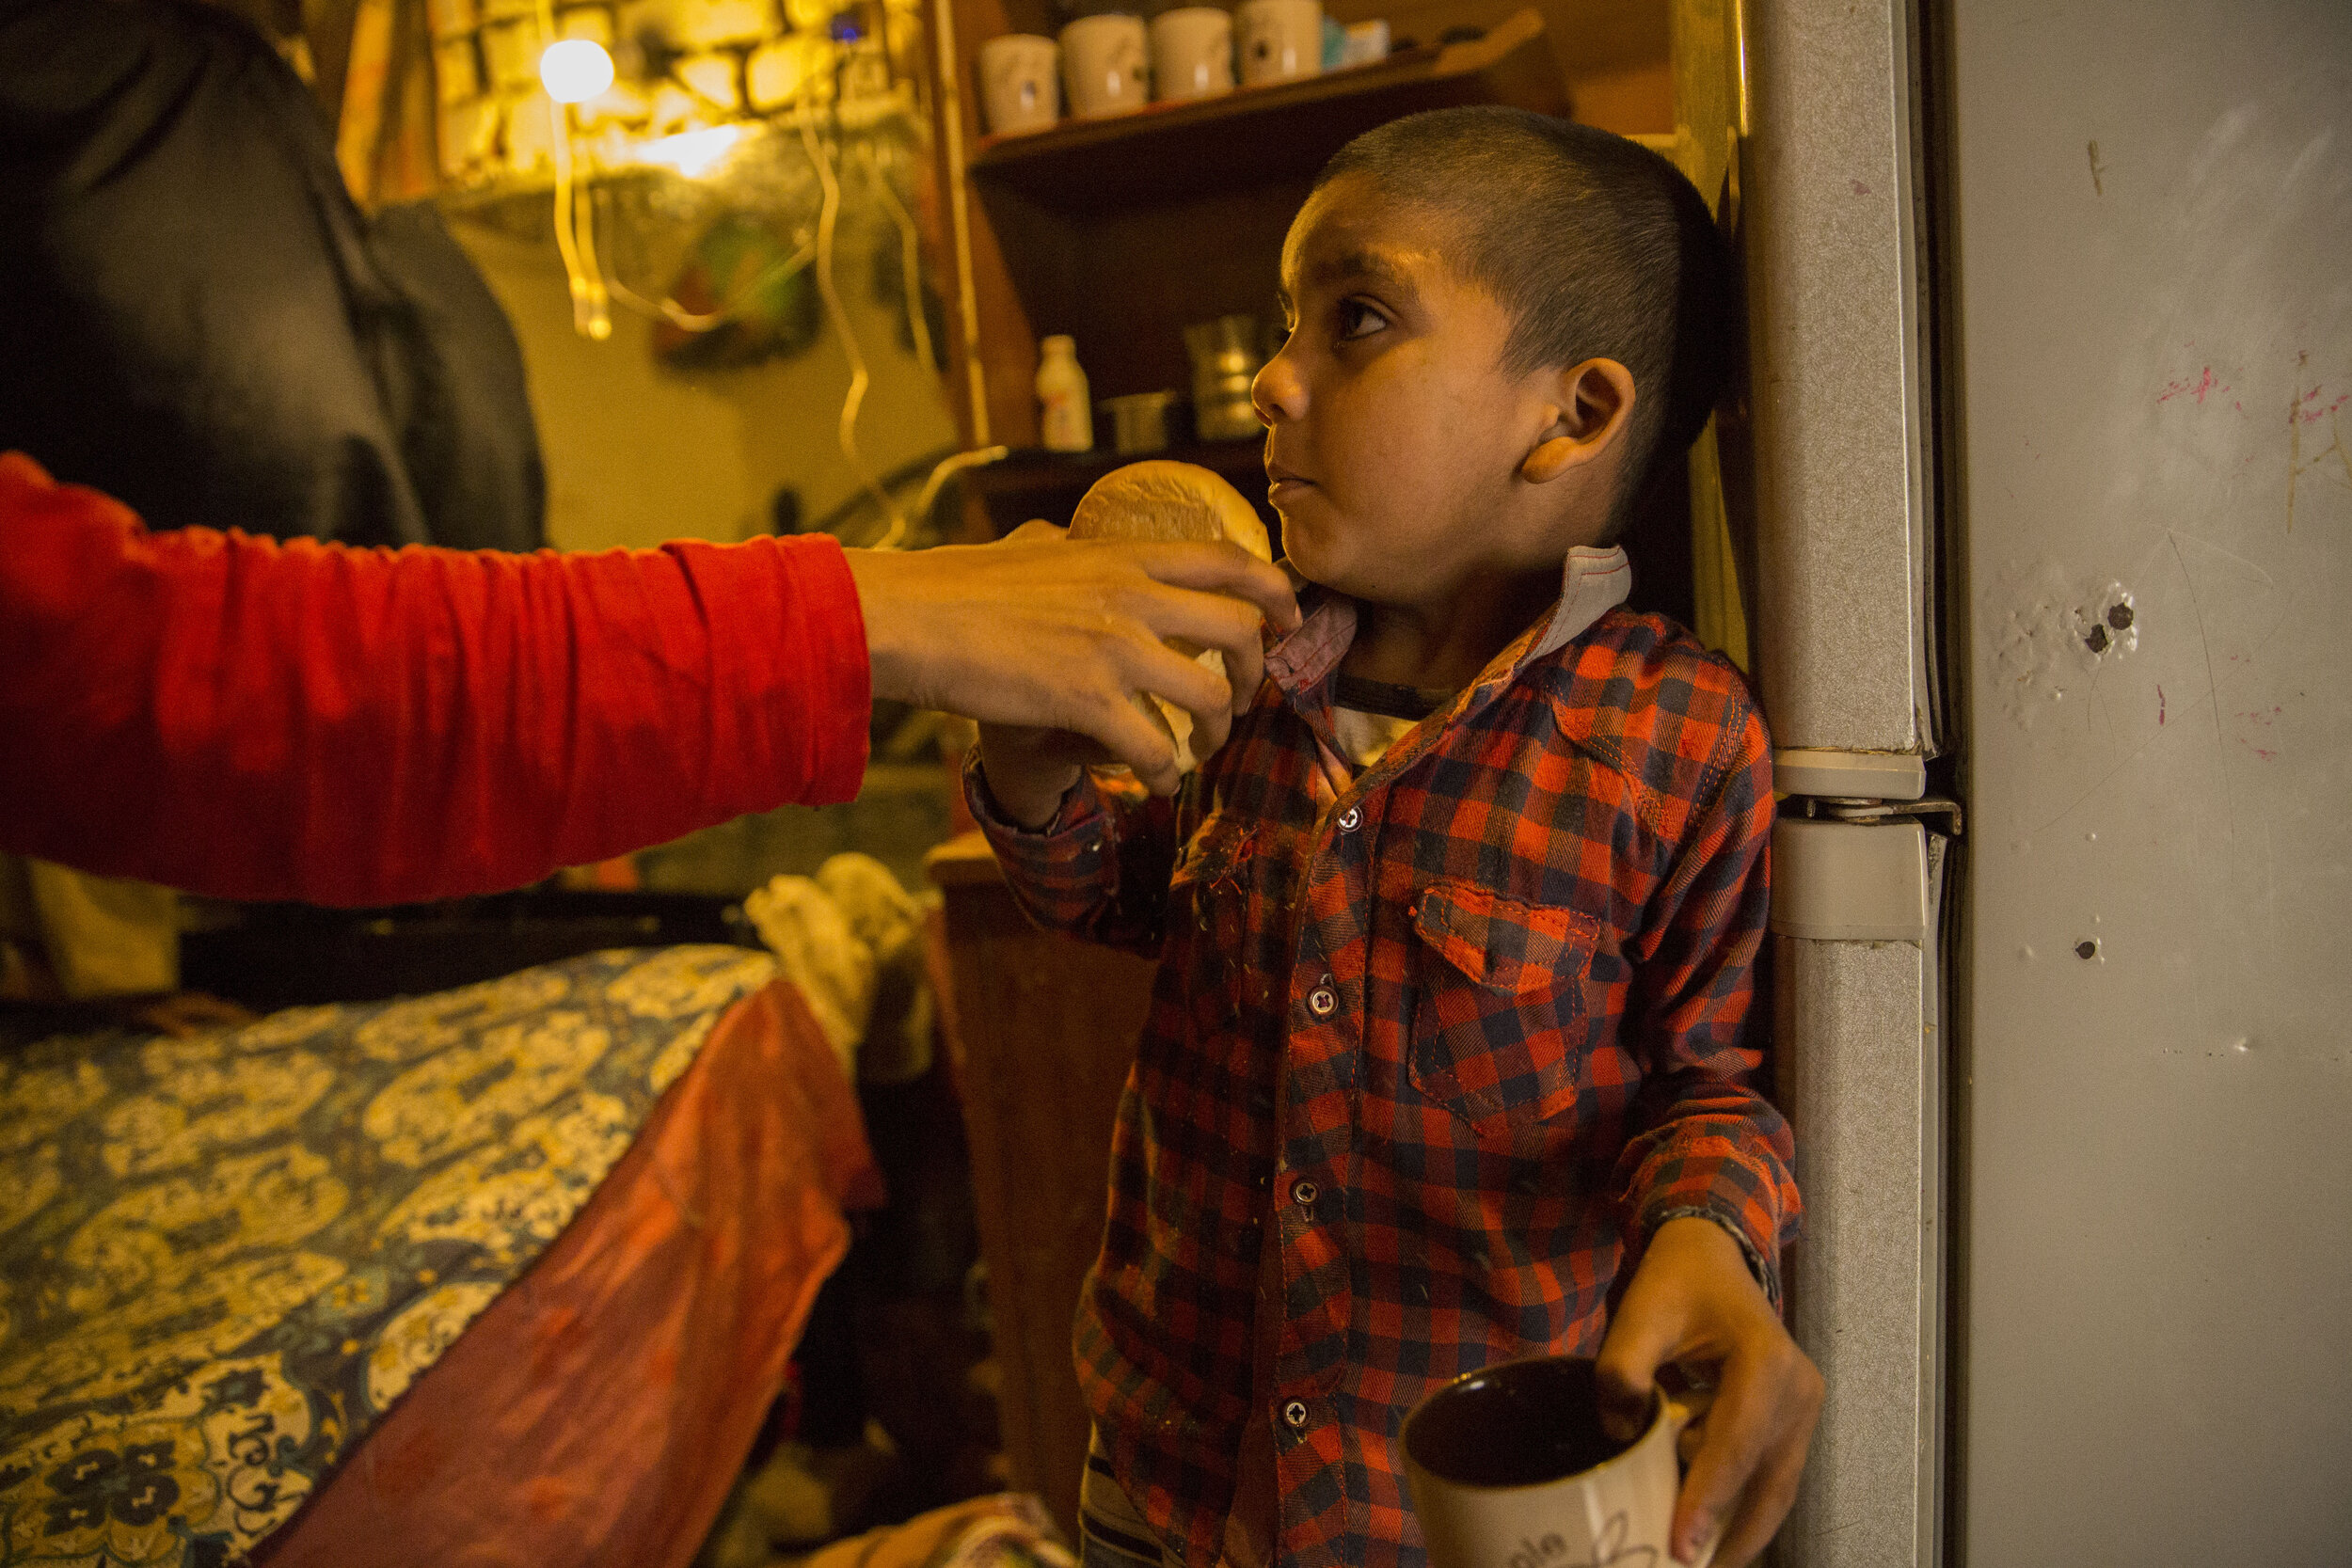  5-year-old Yushya sneaks a few rusks. A 30 cents bag of rusks is rationed in the household because of the tough times the family is going through. 